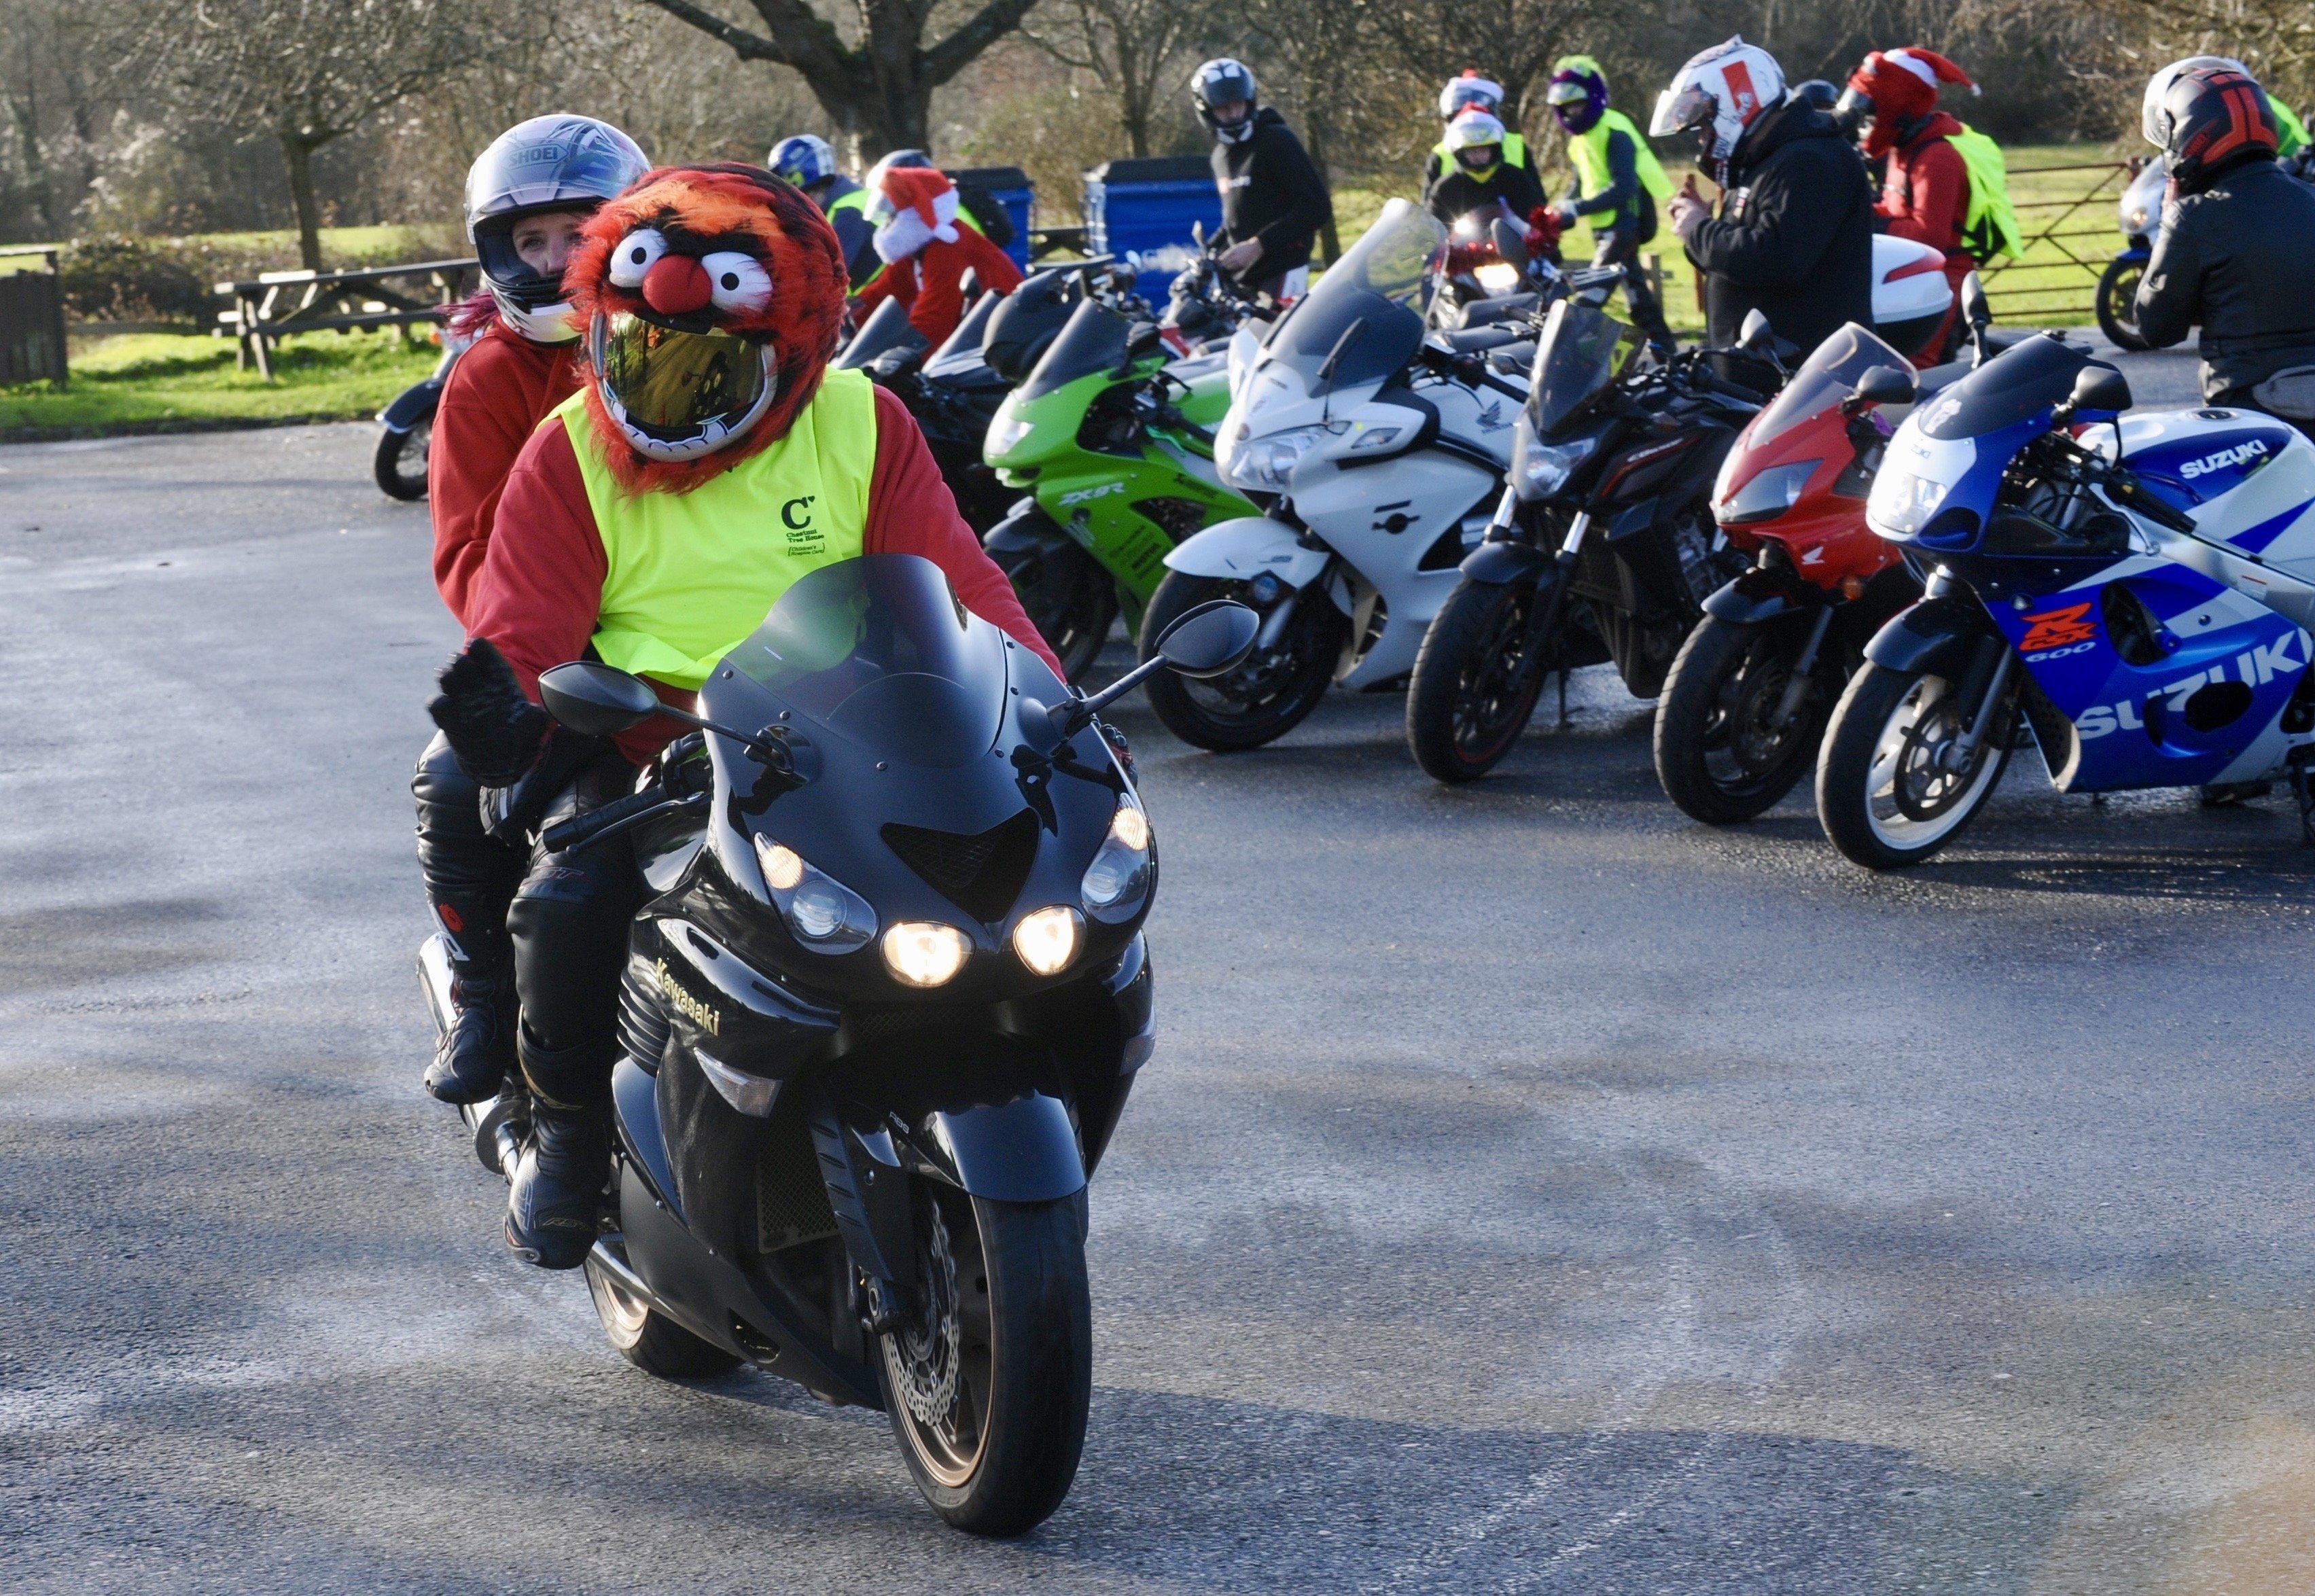 South Coast Bikers ride out to deliver presents to Chestnut Tree House children's hospice – SG141219